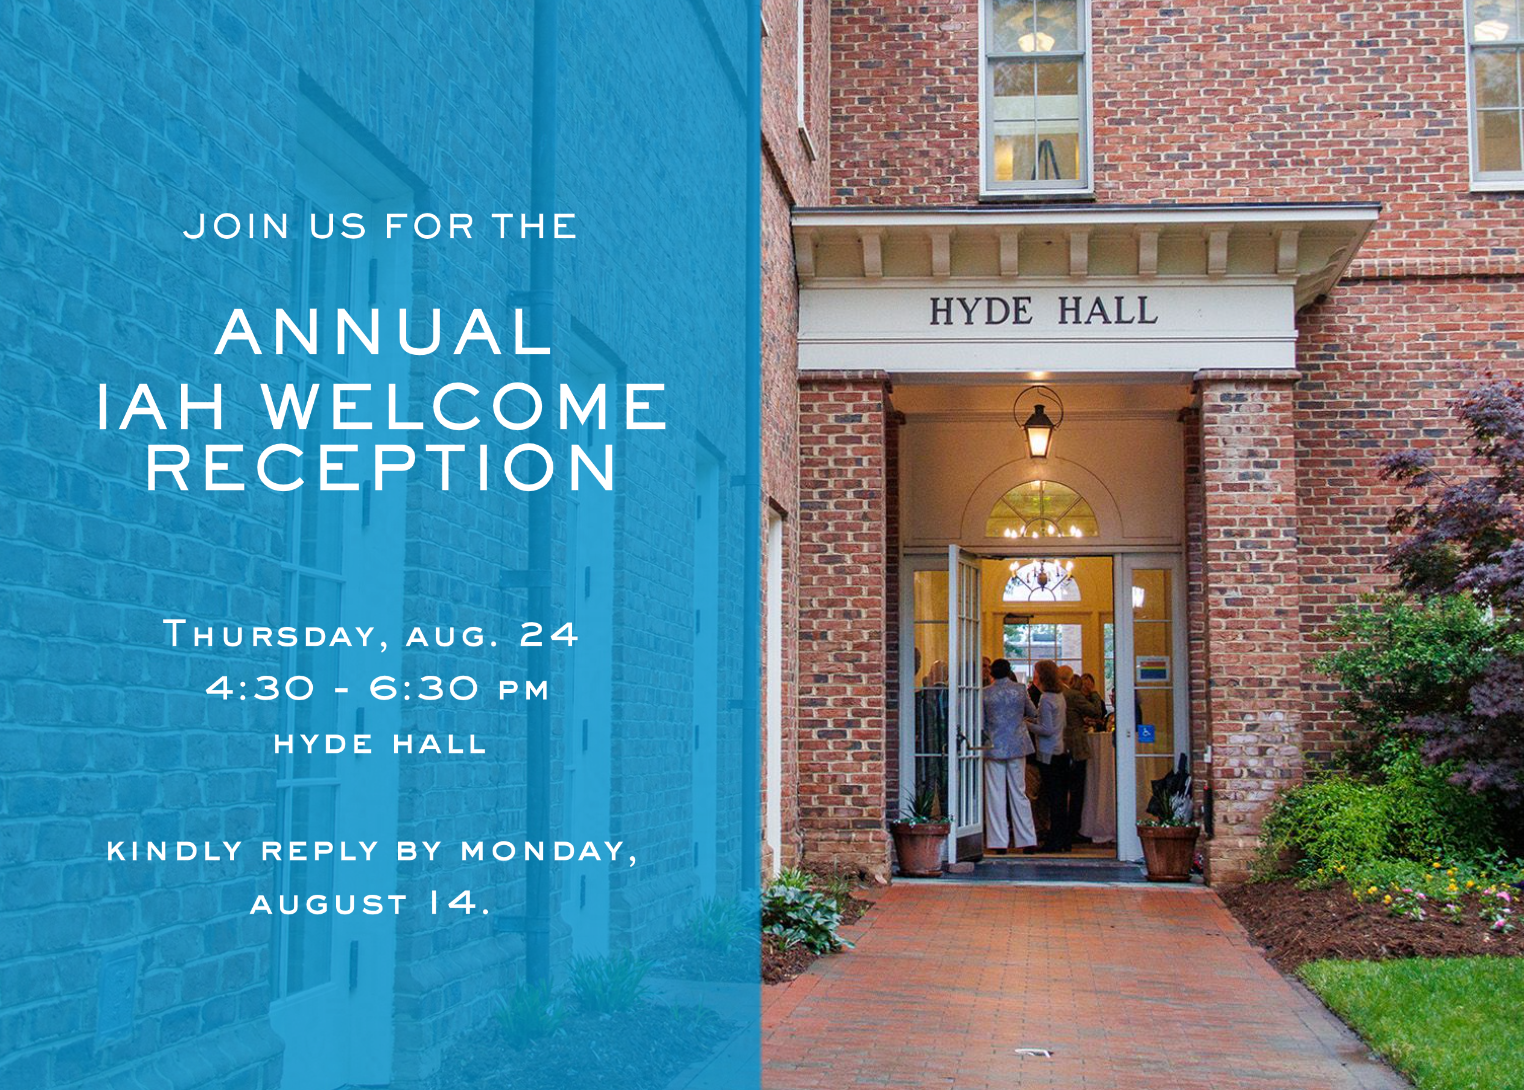 Join us for the annual IAH Welcome Reception. Thursday, Aug. 24. 4:30-6:30PM. Hyde Hall. Kindly reply by Monday, August 14. Entrance to Hyde Hall, lit from inside.